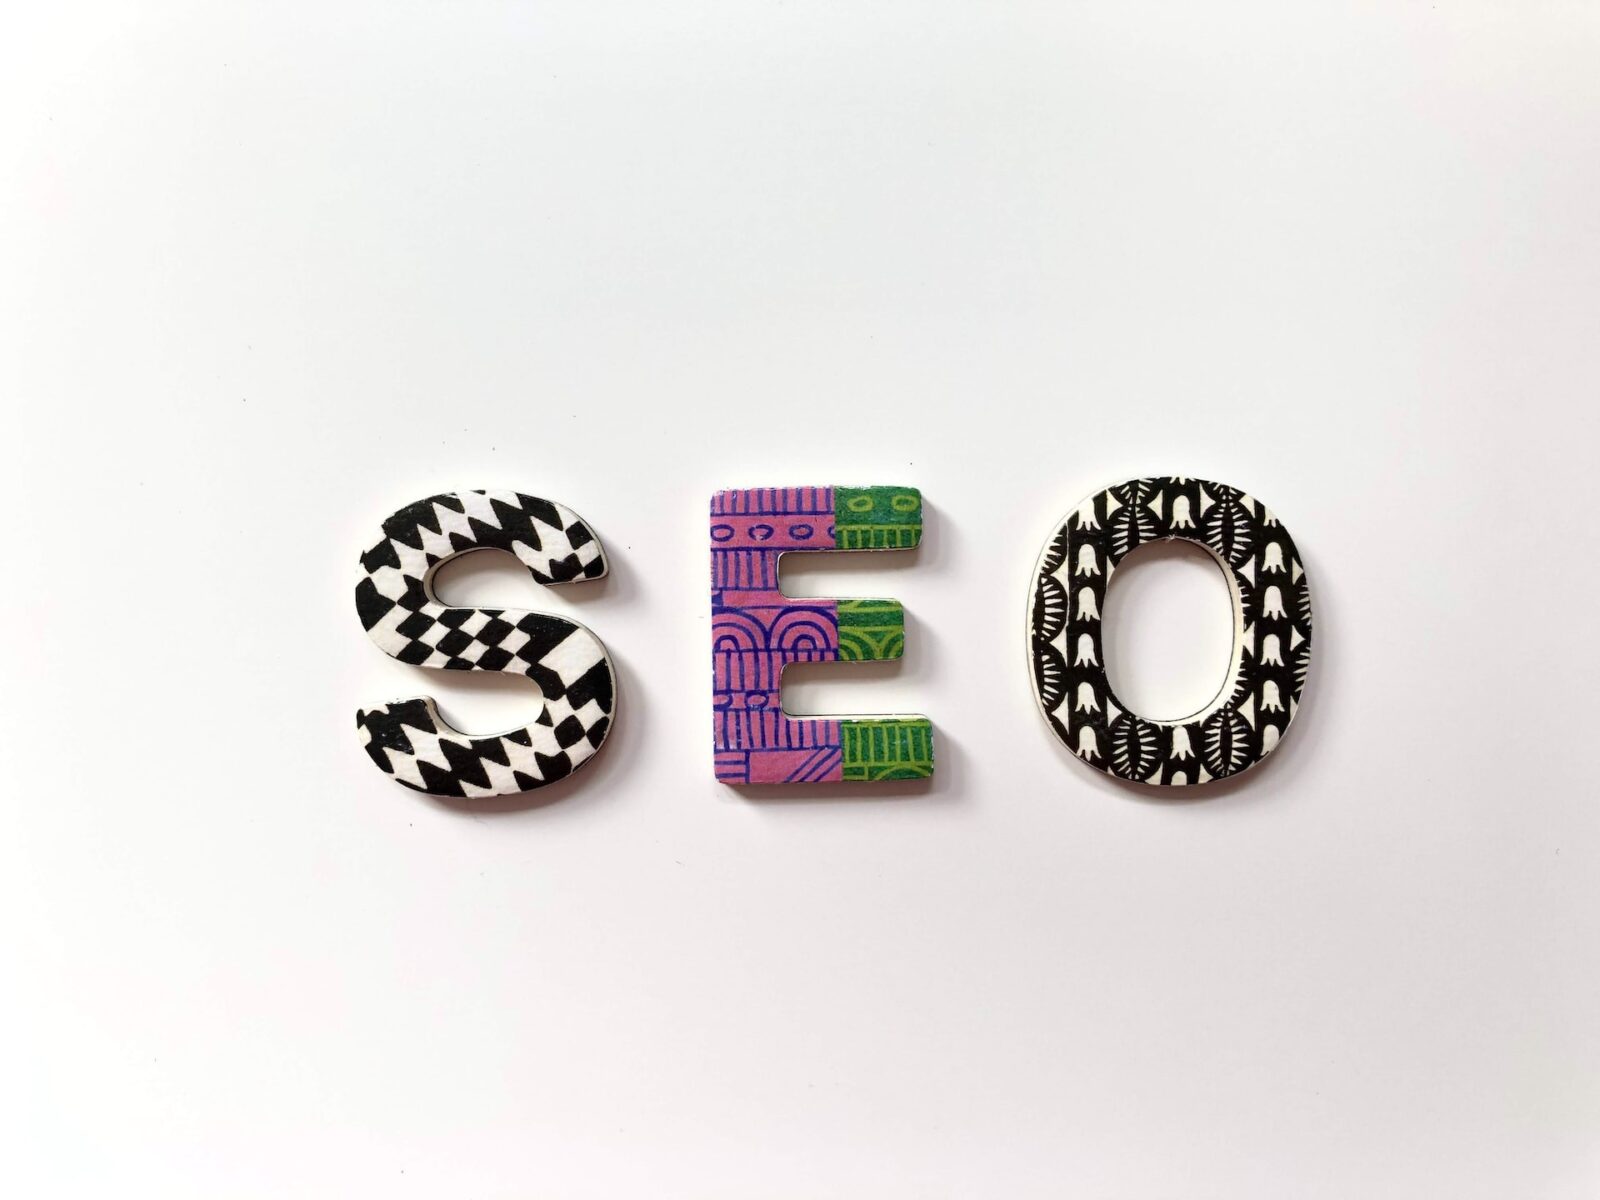 Is It the Right Time to Hire an SEO Company for Professional SEO Services